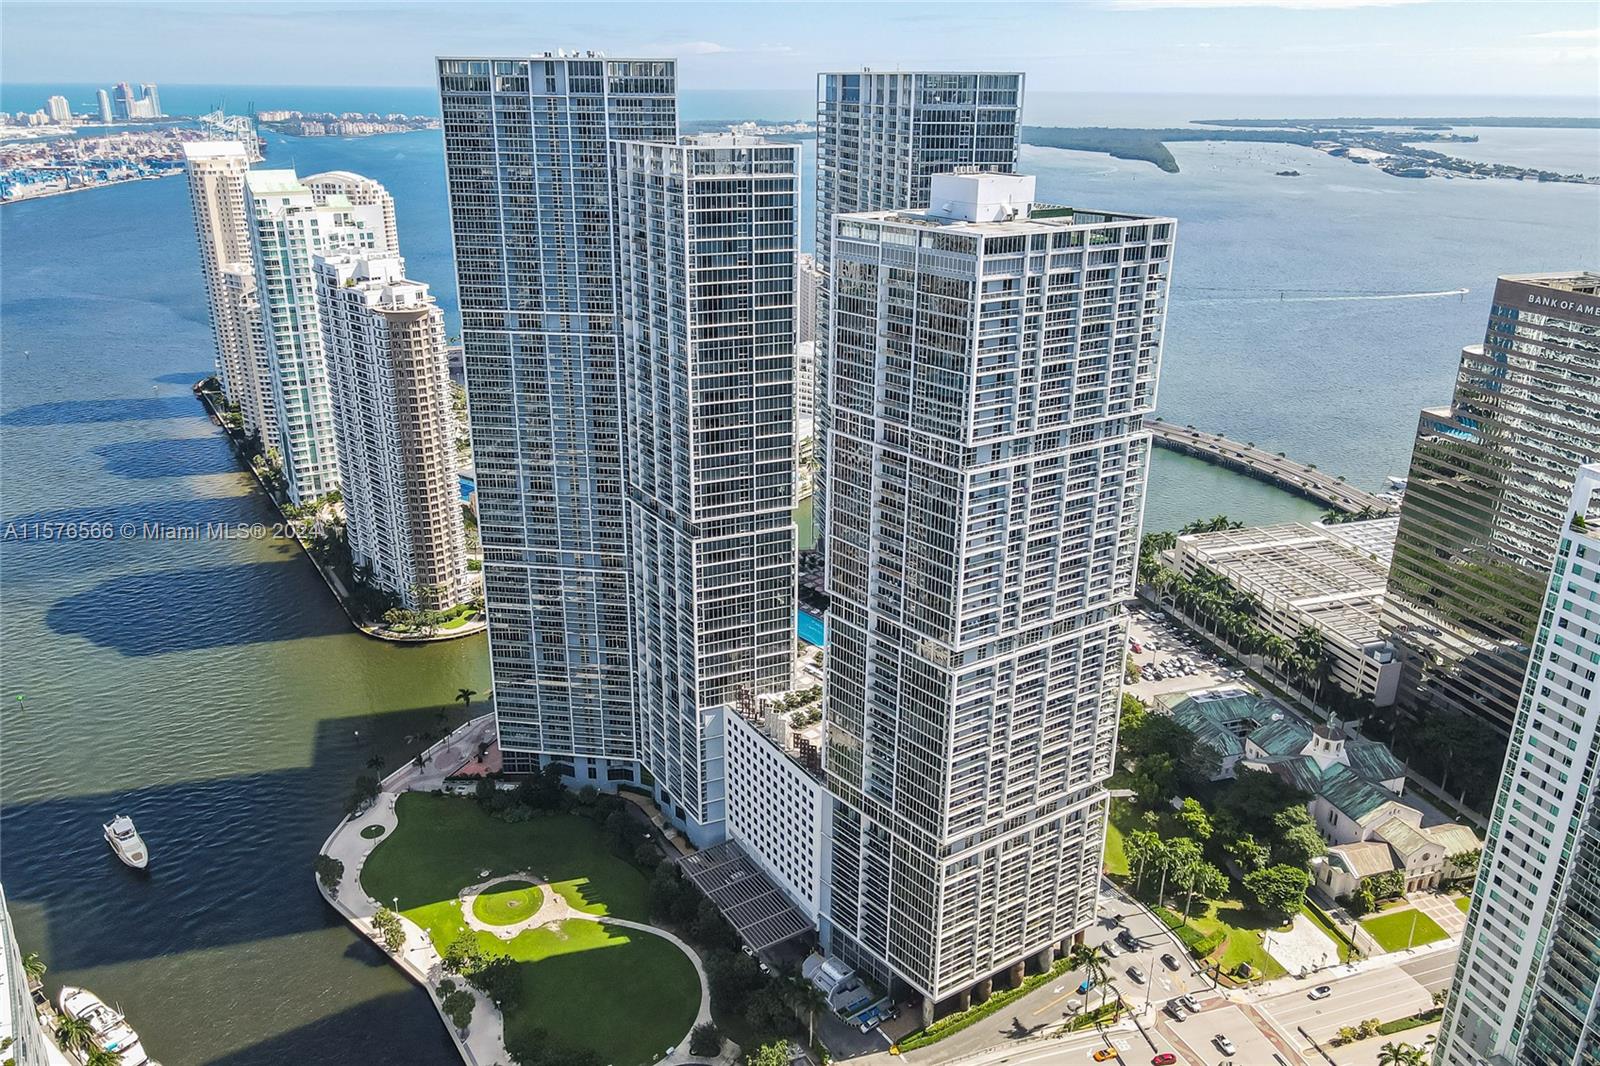 Welcome to Icon Brickell, where luxury meets waterfront living. This exquisite 2-bedroom, 2-bathroom apartment boasts an unparalleled panoramic water view, offering residents a breathtaking vista of the sparkling bay. Entering this unit you will be immediately captivated by the expansive floor-to-ceiling windows that frame the stunning water and bay views. Natural light floods the spacious living area, creating an inviting ambiance throughout. Residents of Icon Brickell also have access to a plethora of world-class amenities, from the fitness center to the resort-style pool and spa. The building's prime location allows for easy access to the vibrant dining, shopping, and entertainment options that Brickell has to offer. Set up your showing today!